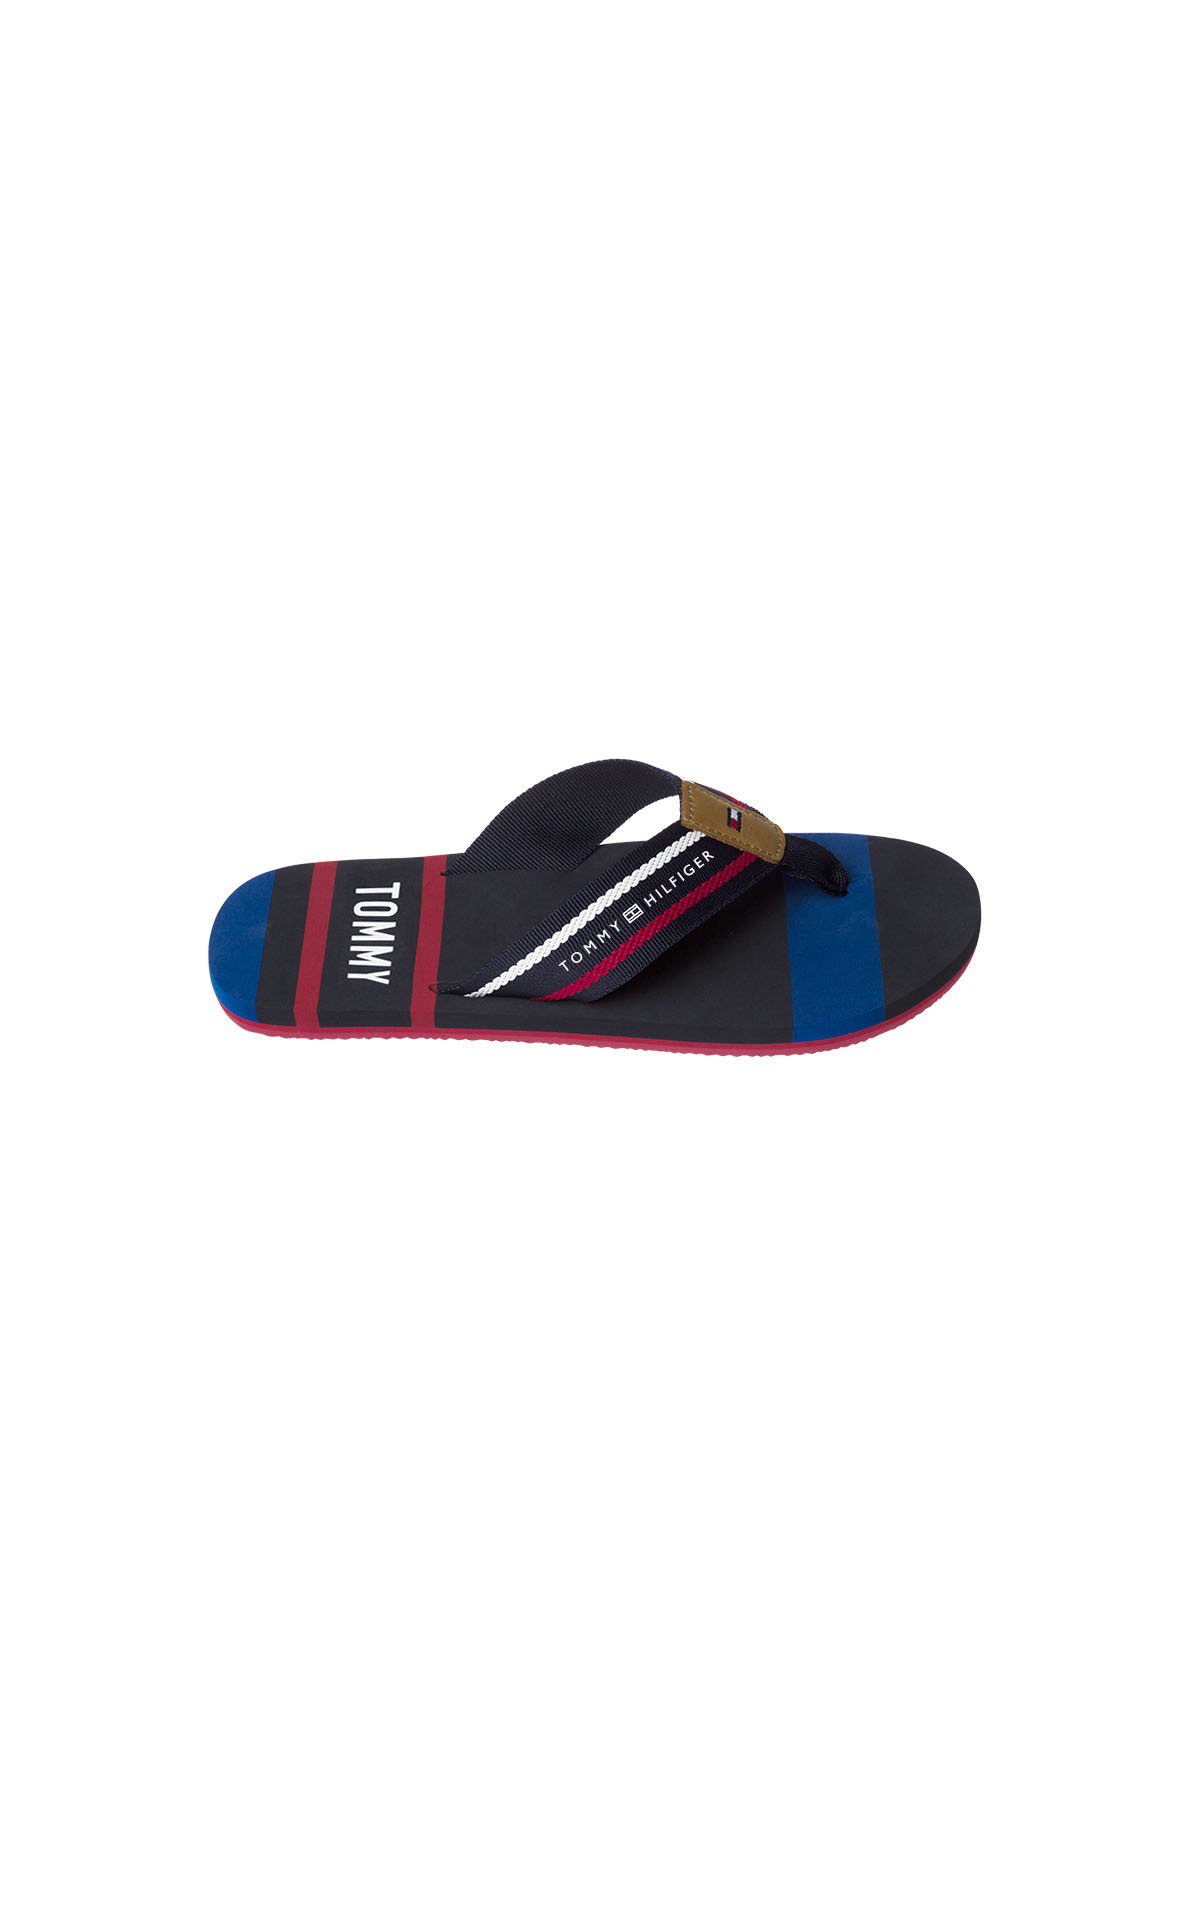 Tommy Hilfiger Striped Beach Sandal at The Bicester Village Shopping Collection